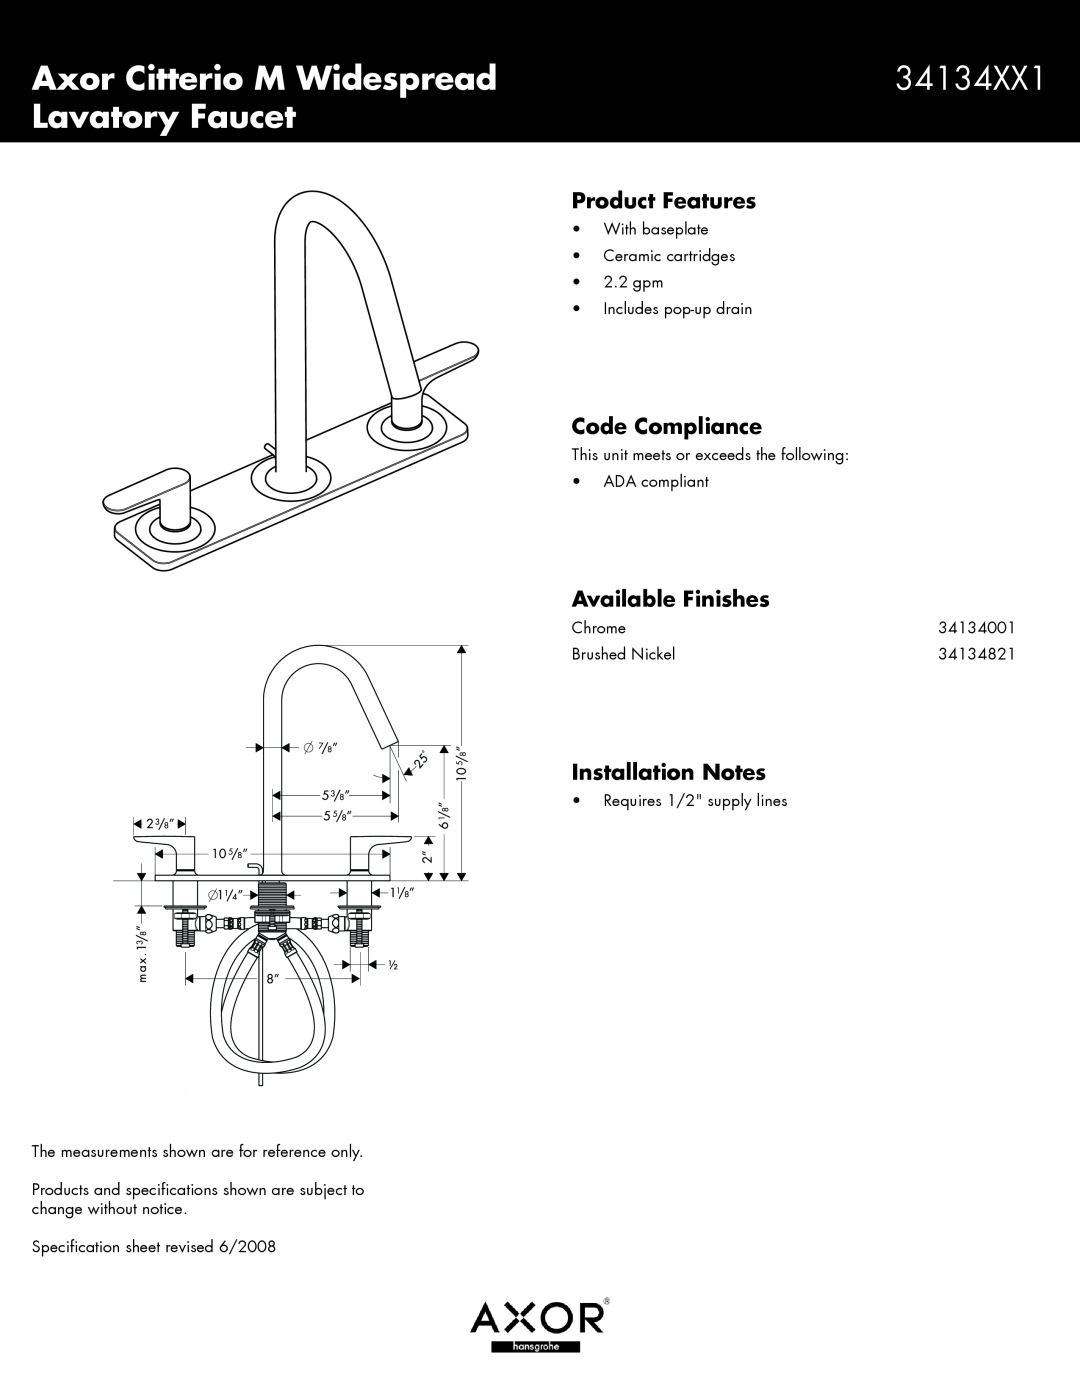 Axor 34134001 specifications Axor Citterio M Widespread, 34134XX1, Lavatory Faucet, Product Features, Code Compliance 